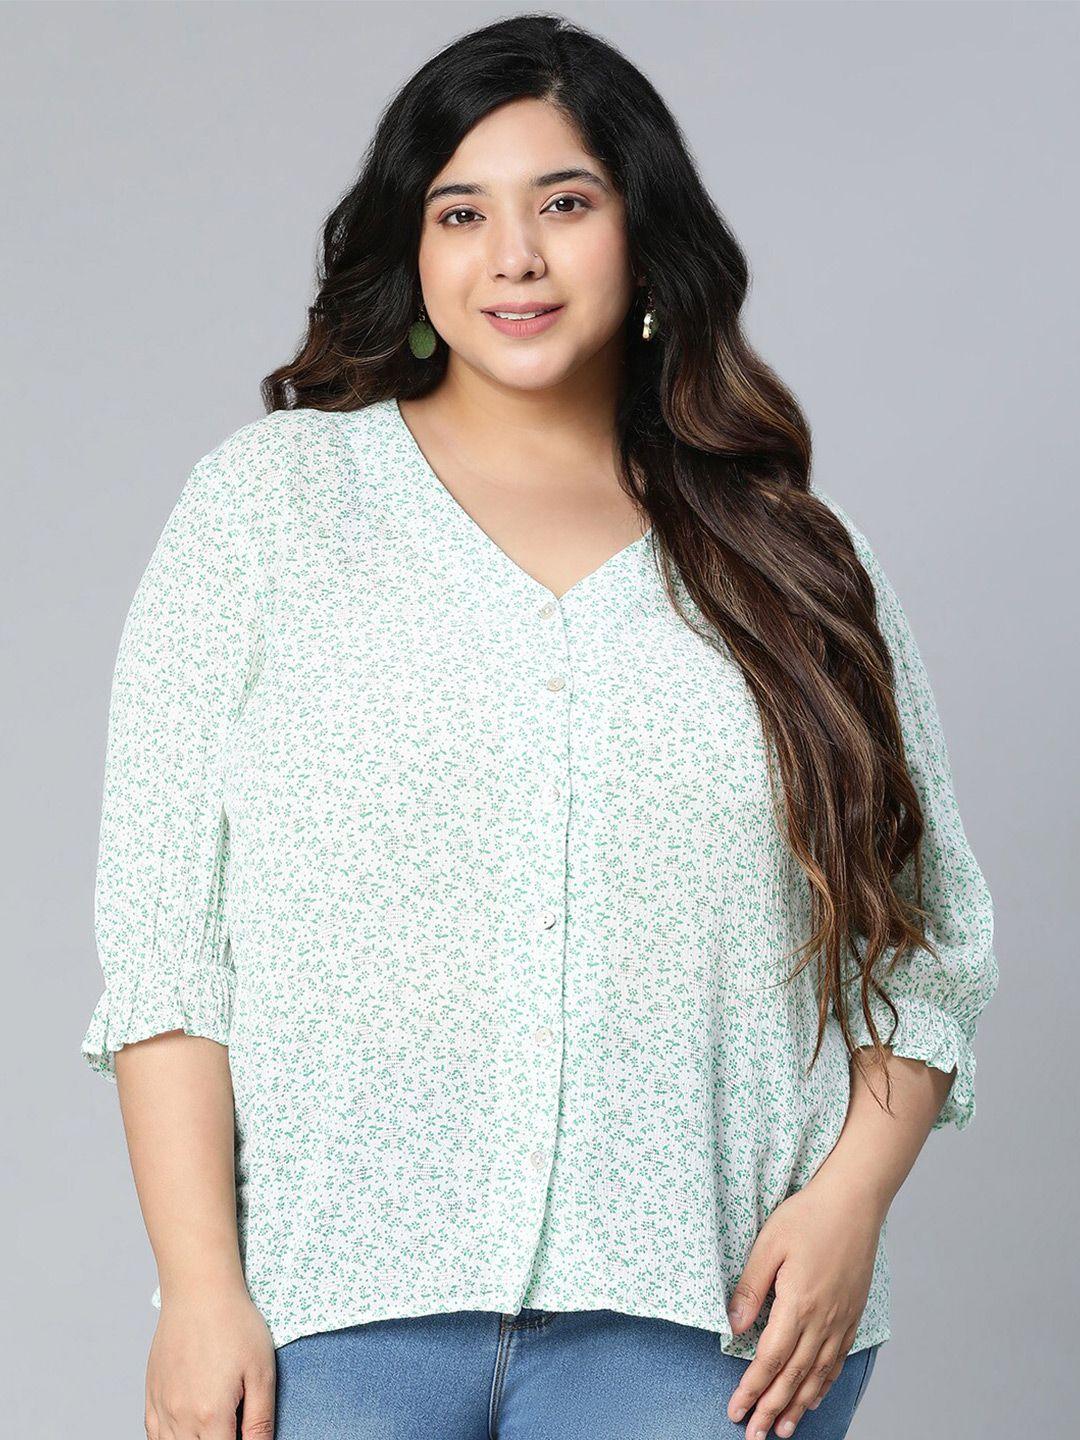 oxolloxo plus size green floral print crepe shirt style top